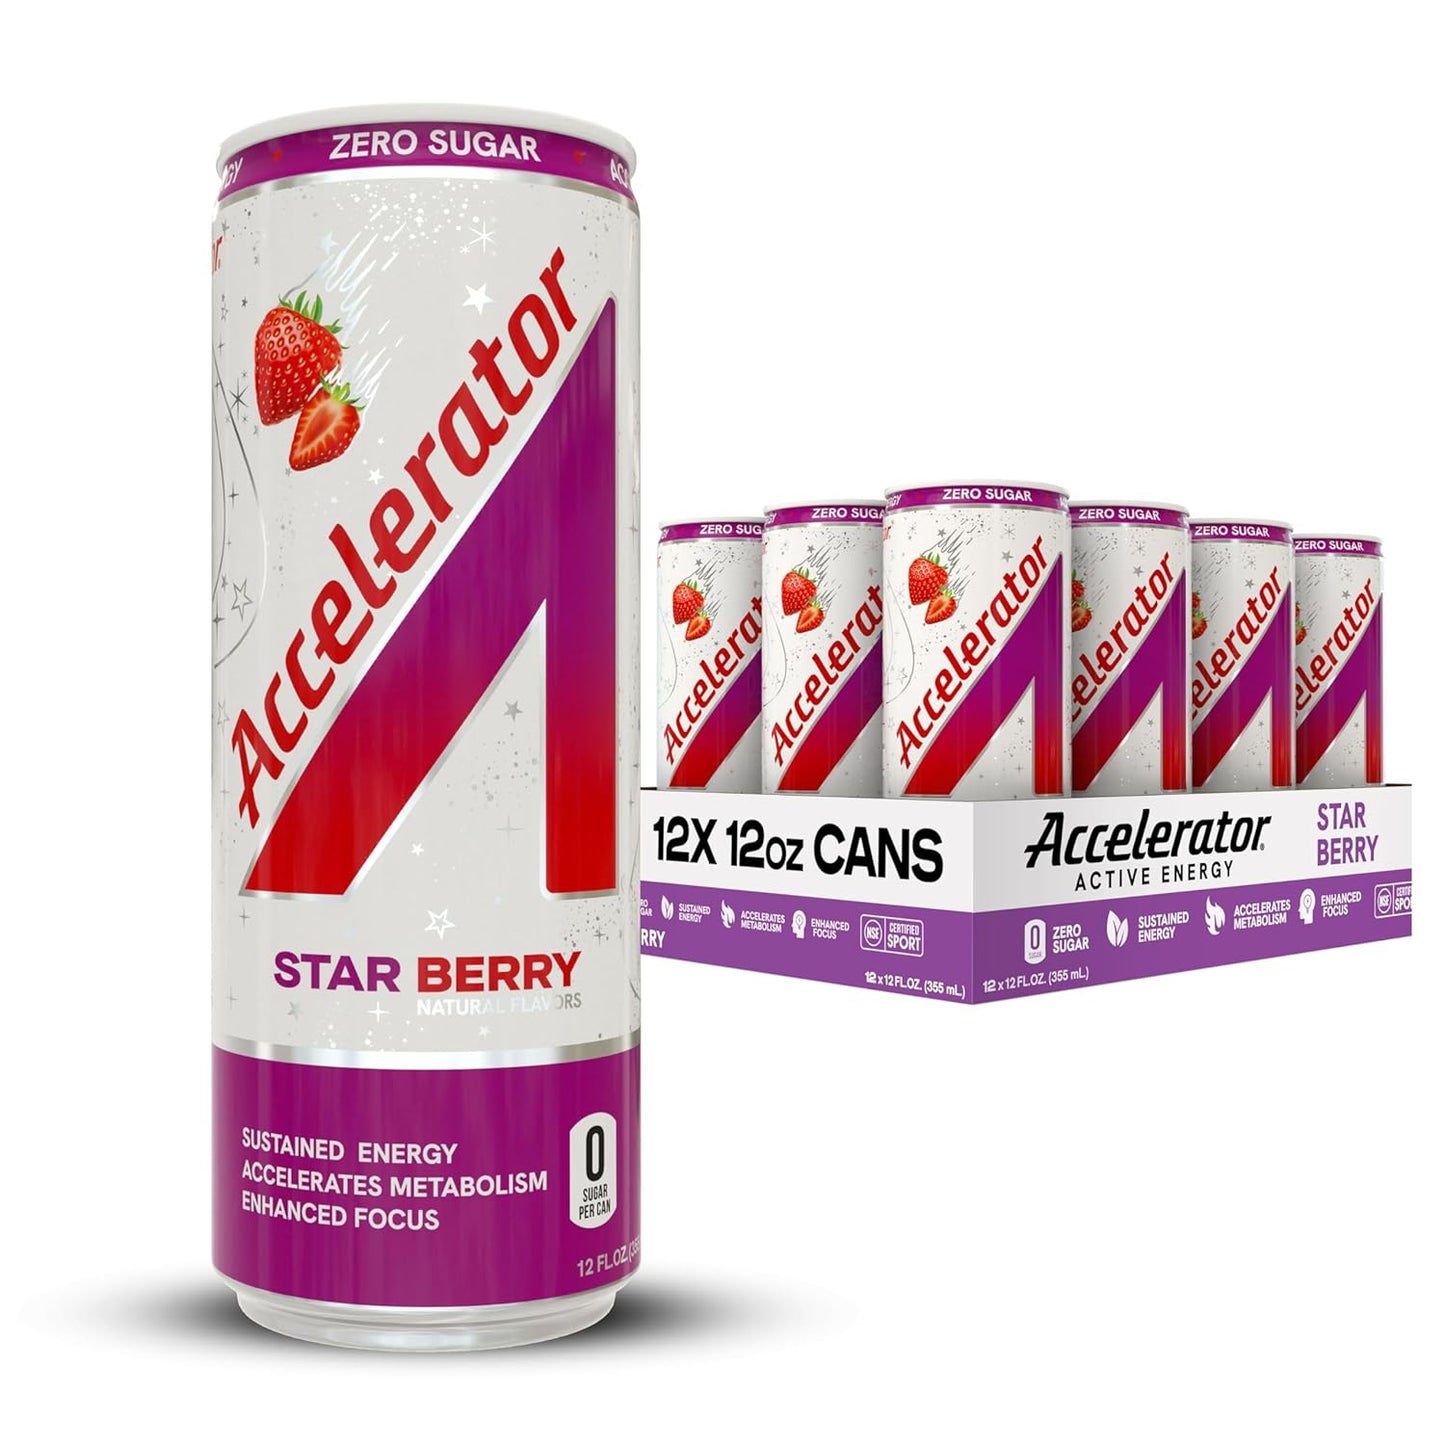 Adrenaline Shoc Starberry Cans, 12oz